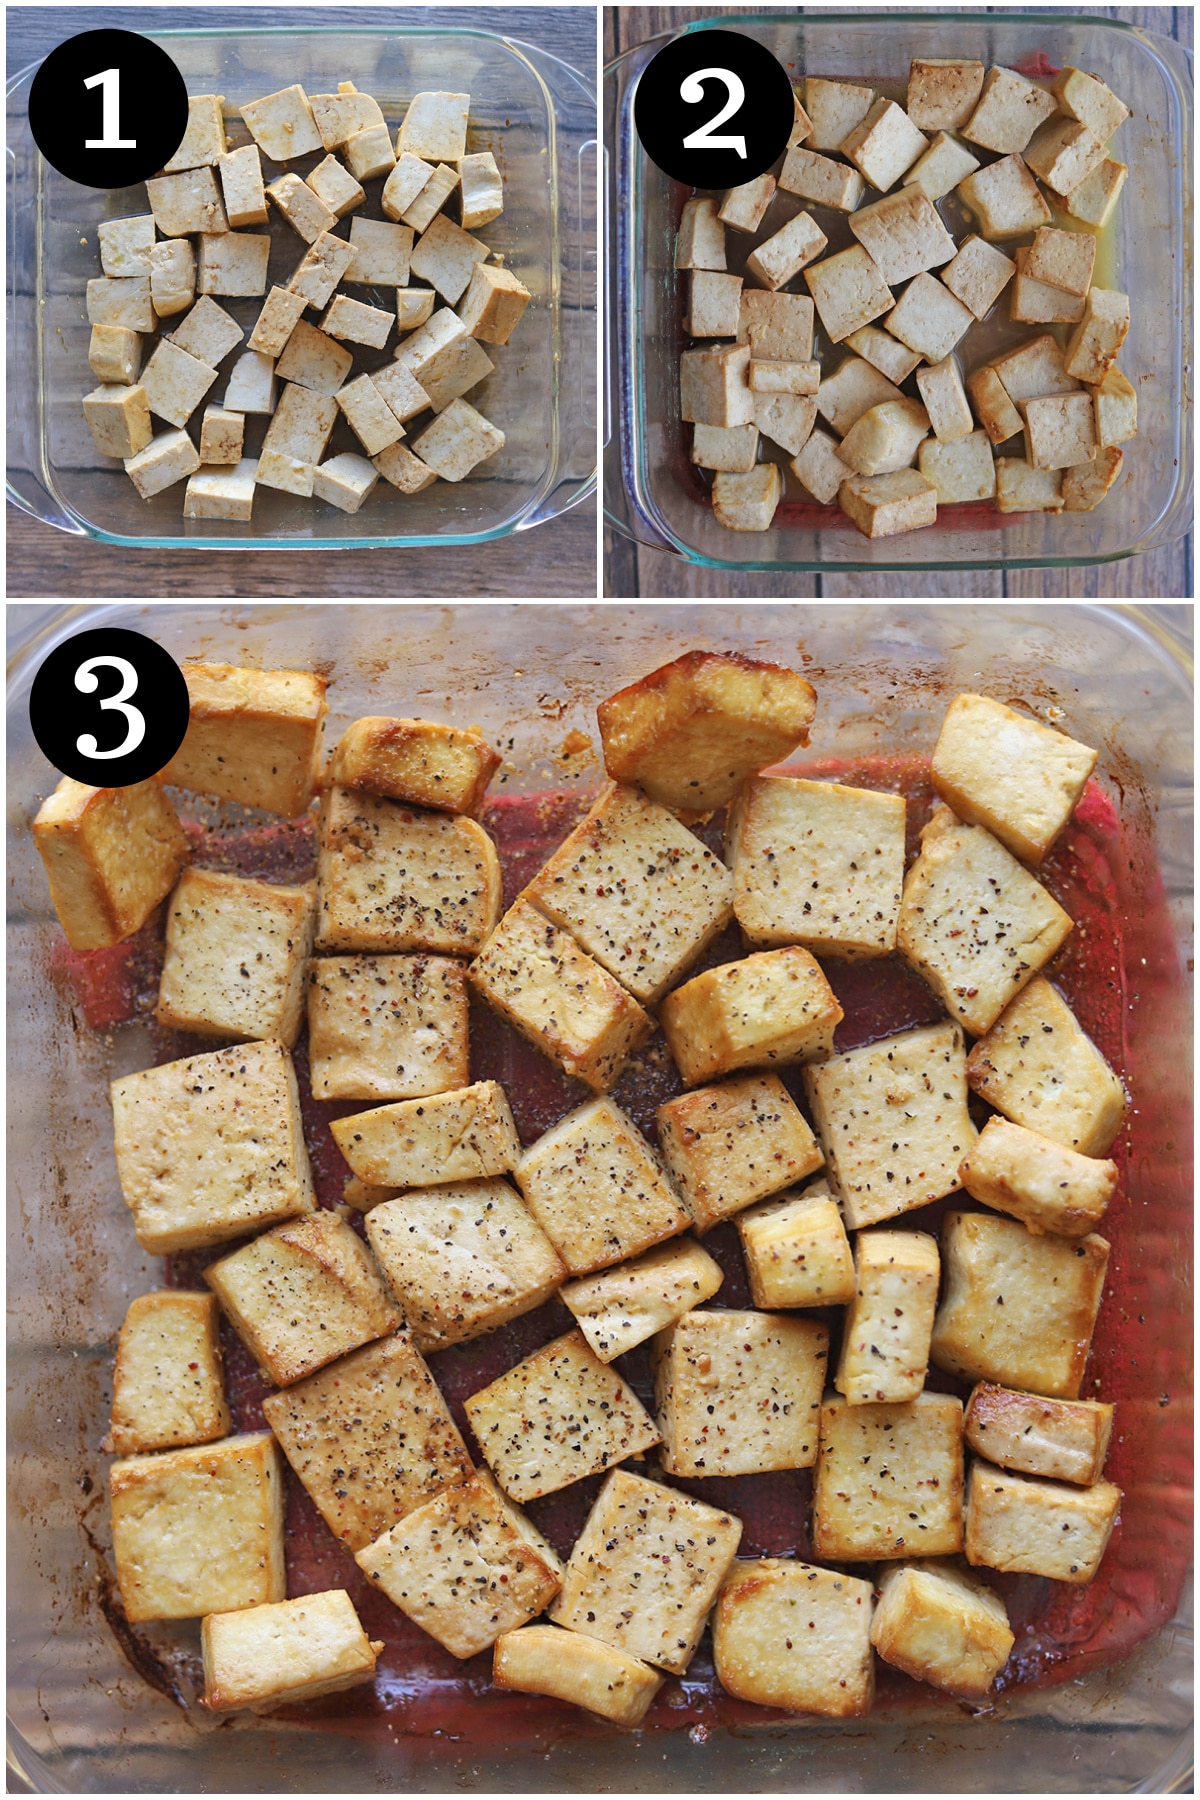 Collage showing how to make baked tofu in casserole dish.